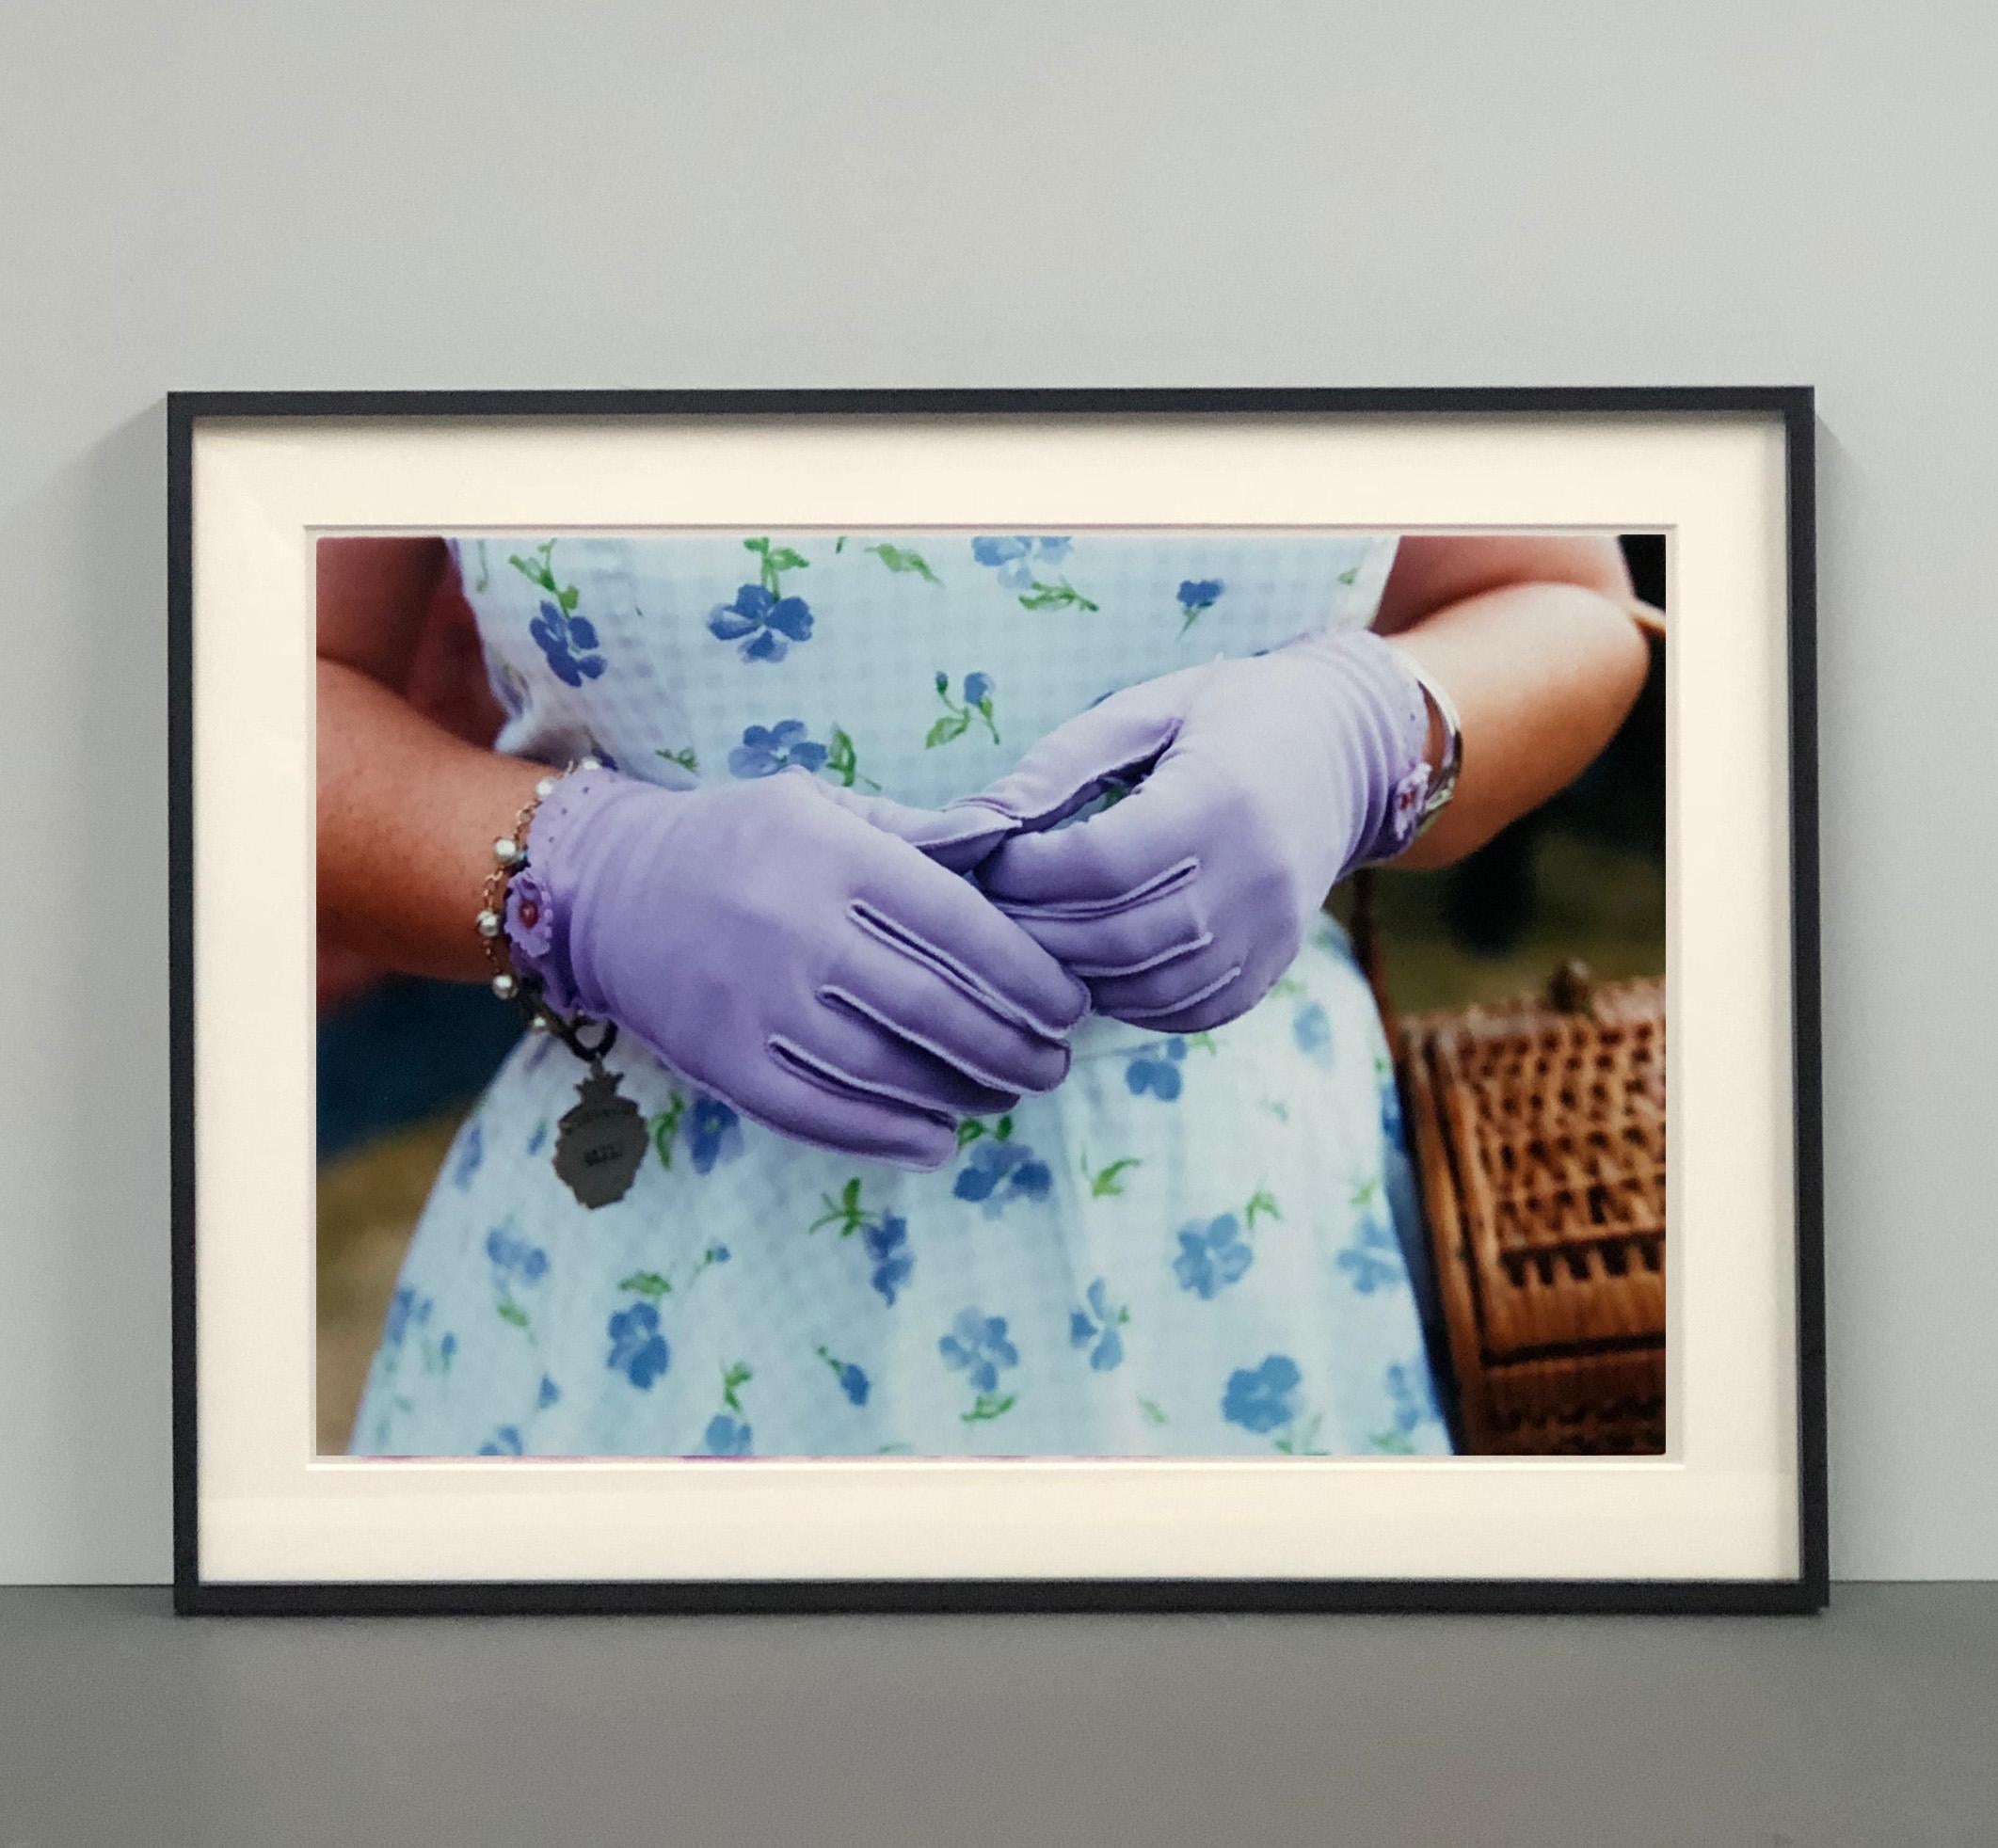 Lilac Gloves, Goodwood, Chichester - Feminine fashion, color photography - Contemporary Photograph by Richard Heeps